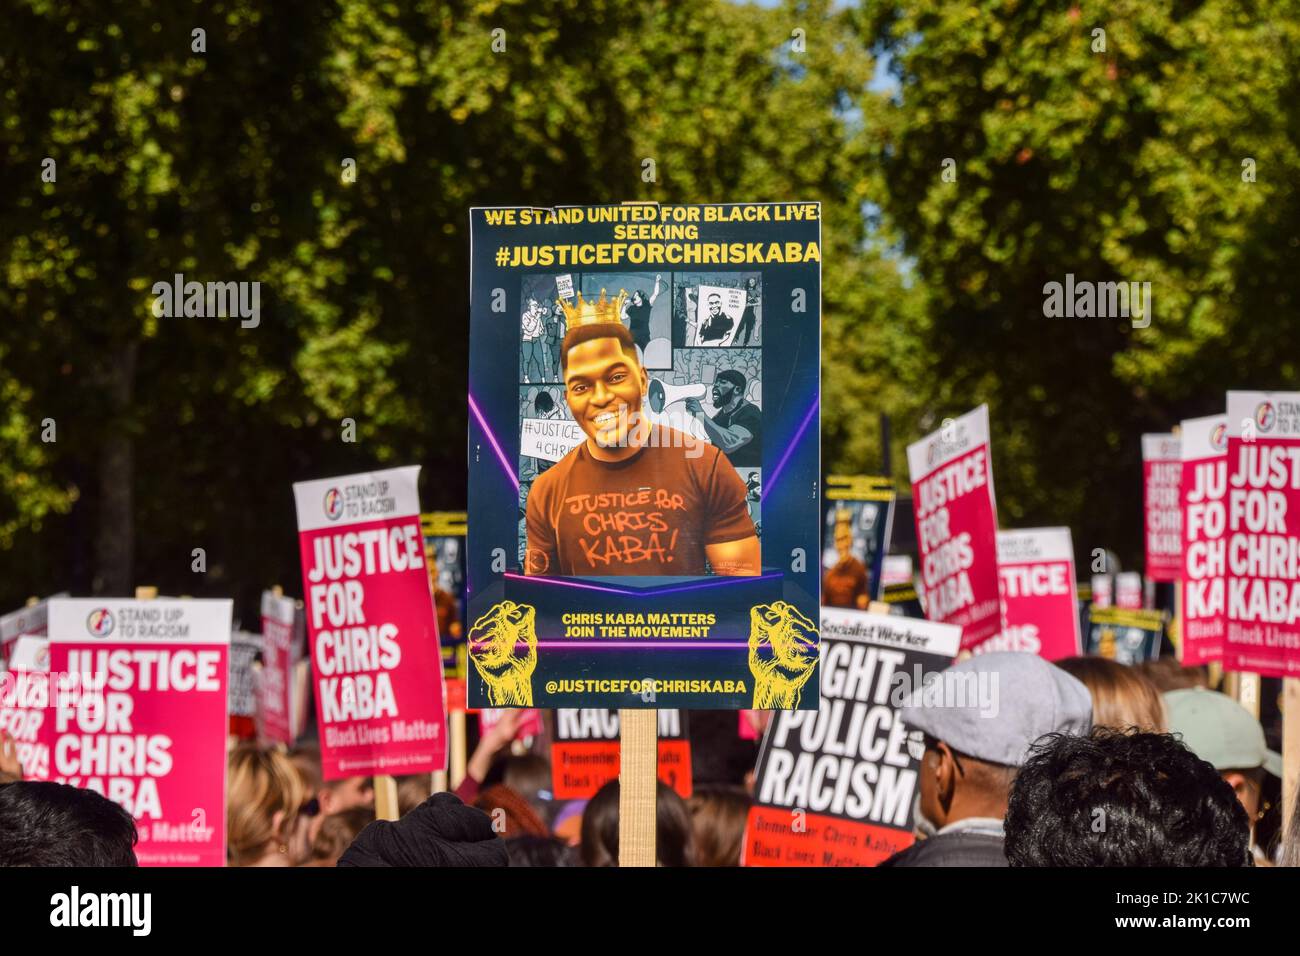 London, UK. 17th Sep, 2022. Protesters gathered outside New Scotland Yard demanding justice for Chris Kaba, who was shot and killed by police despite being unarmed. Credit: Vuk Valcic/Alamy Live News Stock Photo